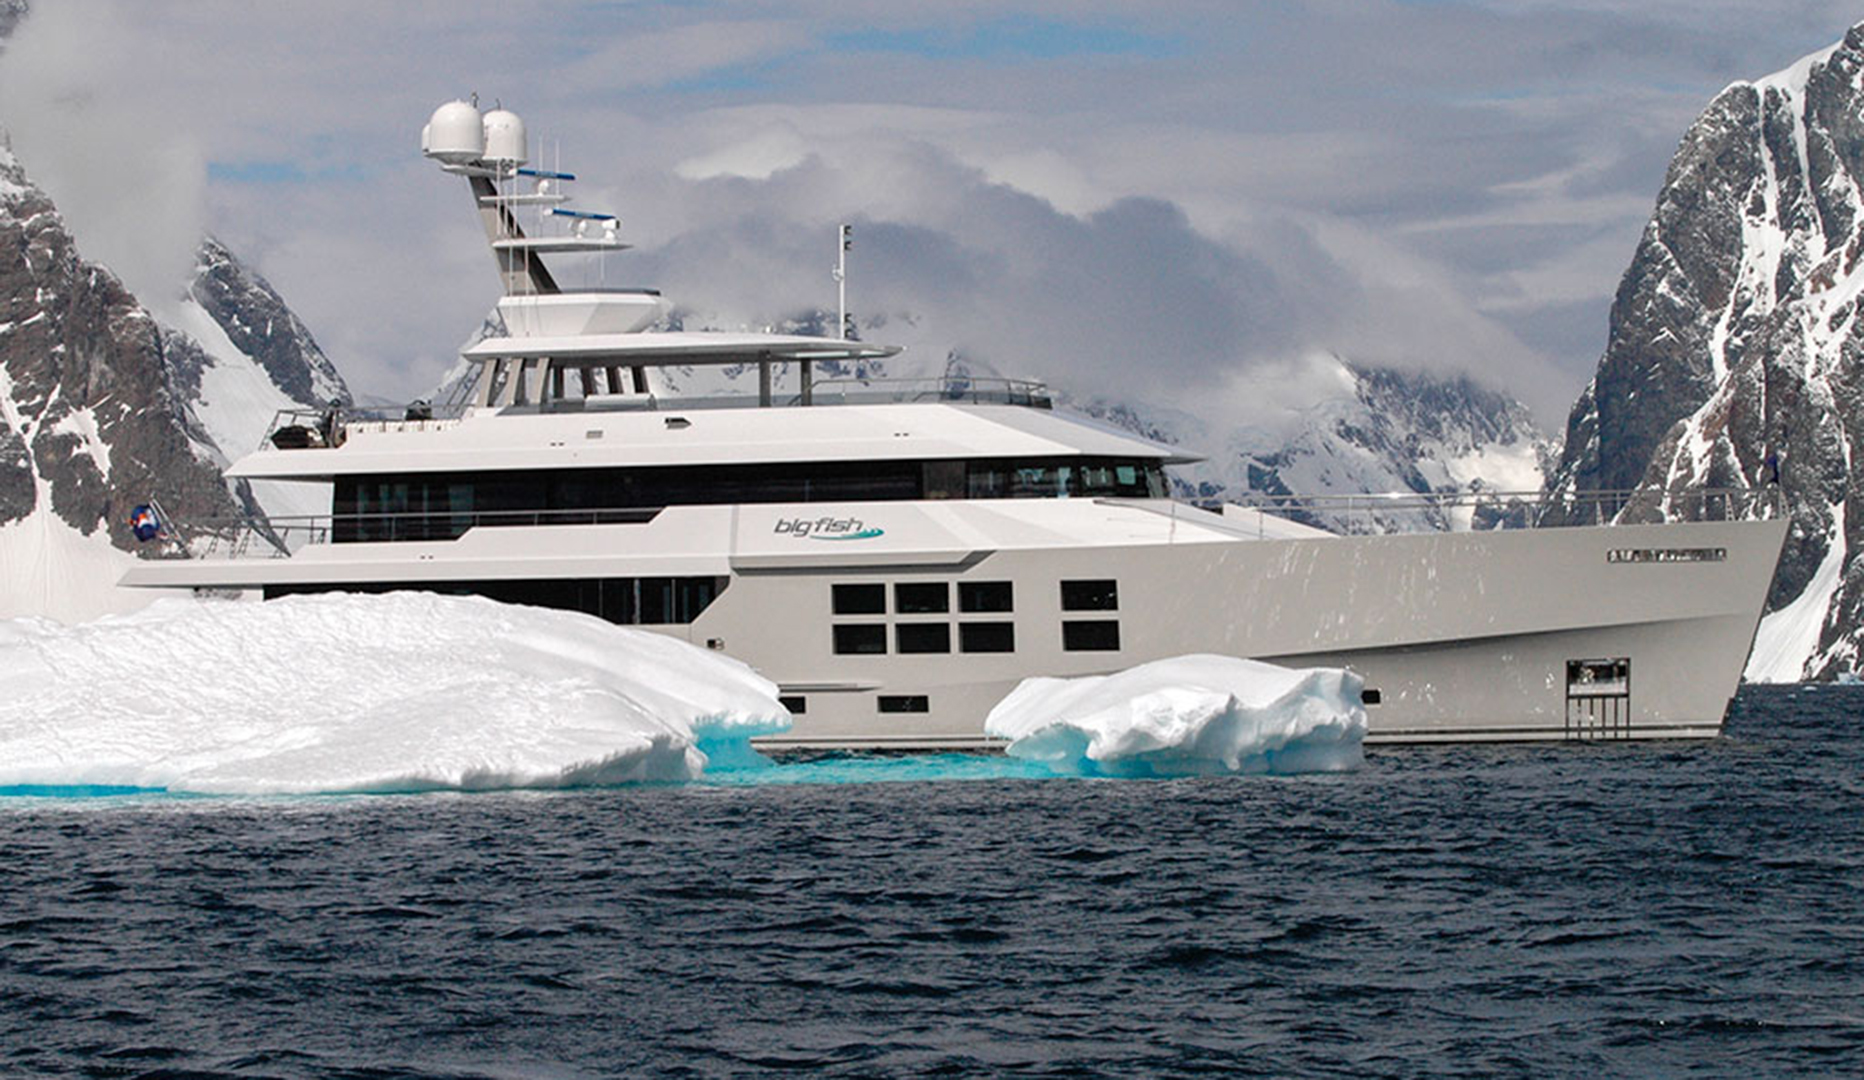 A sign of the times? A superyacht auction and only an expedition yacht sells.